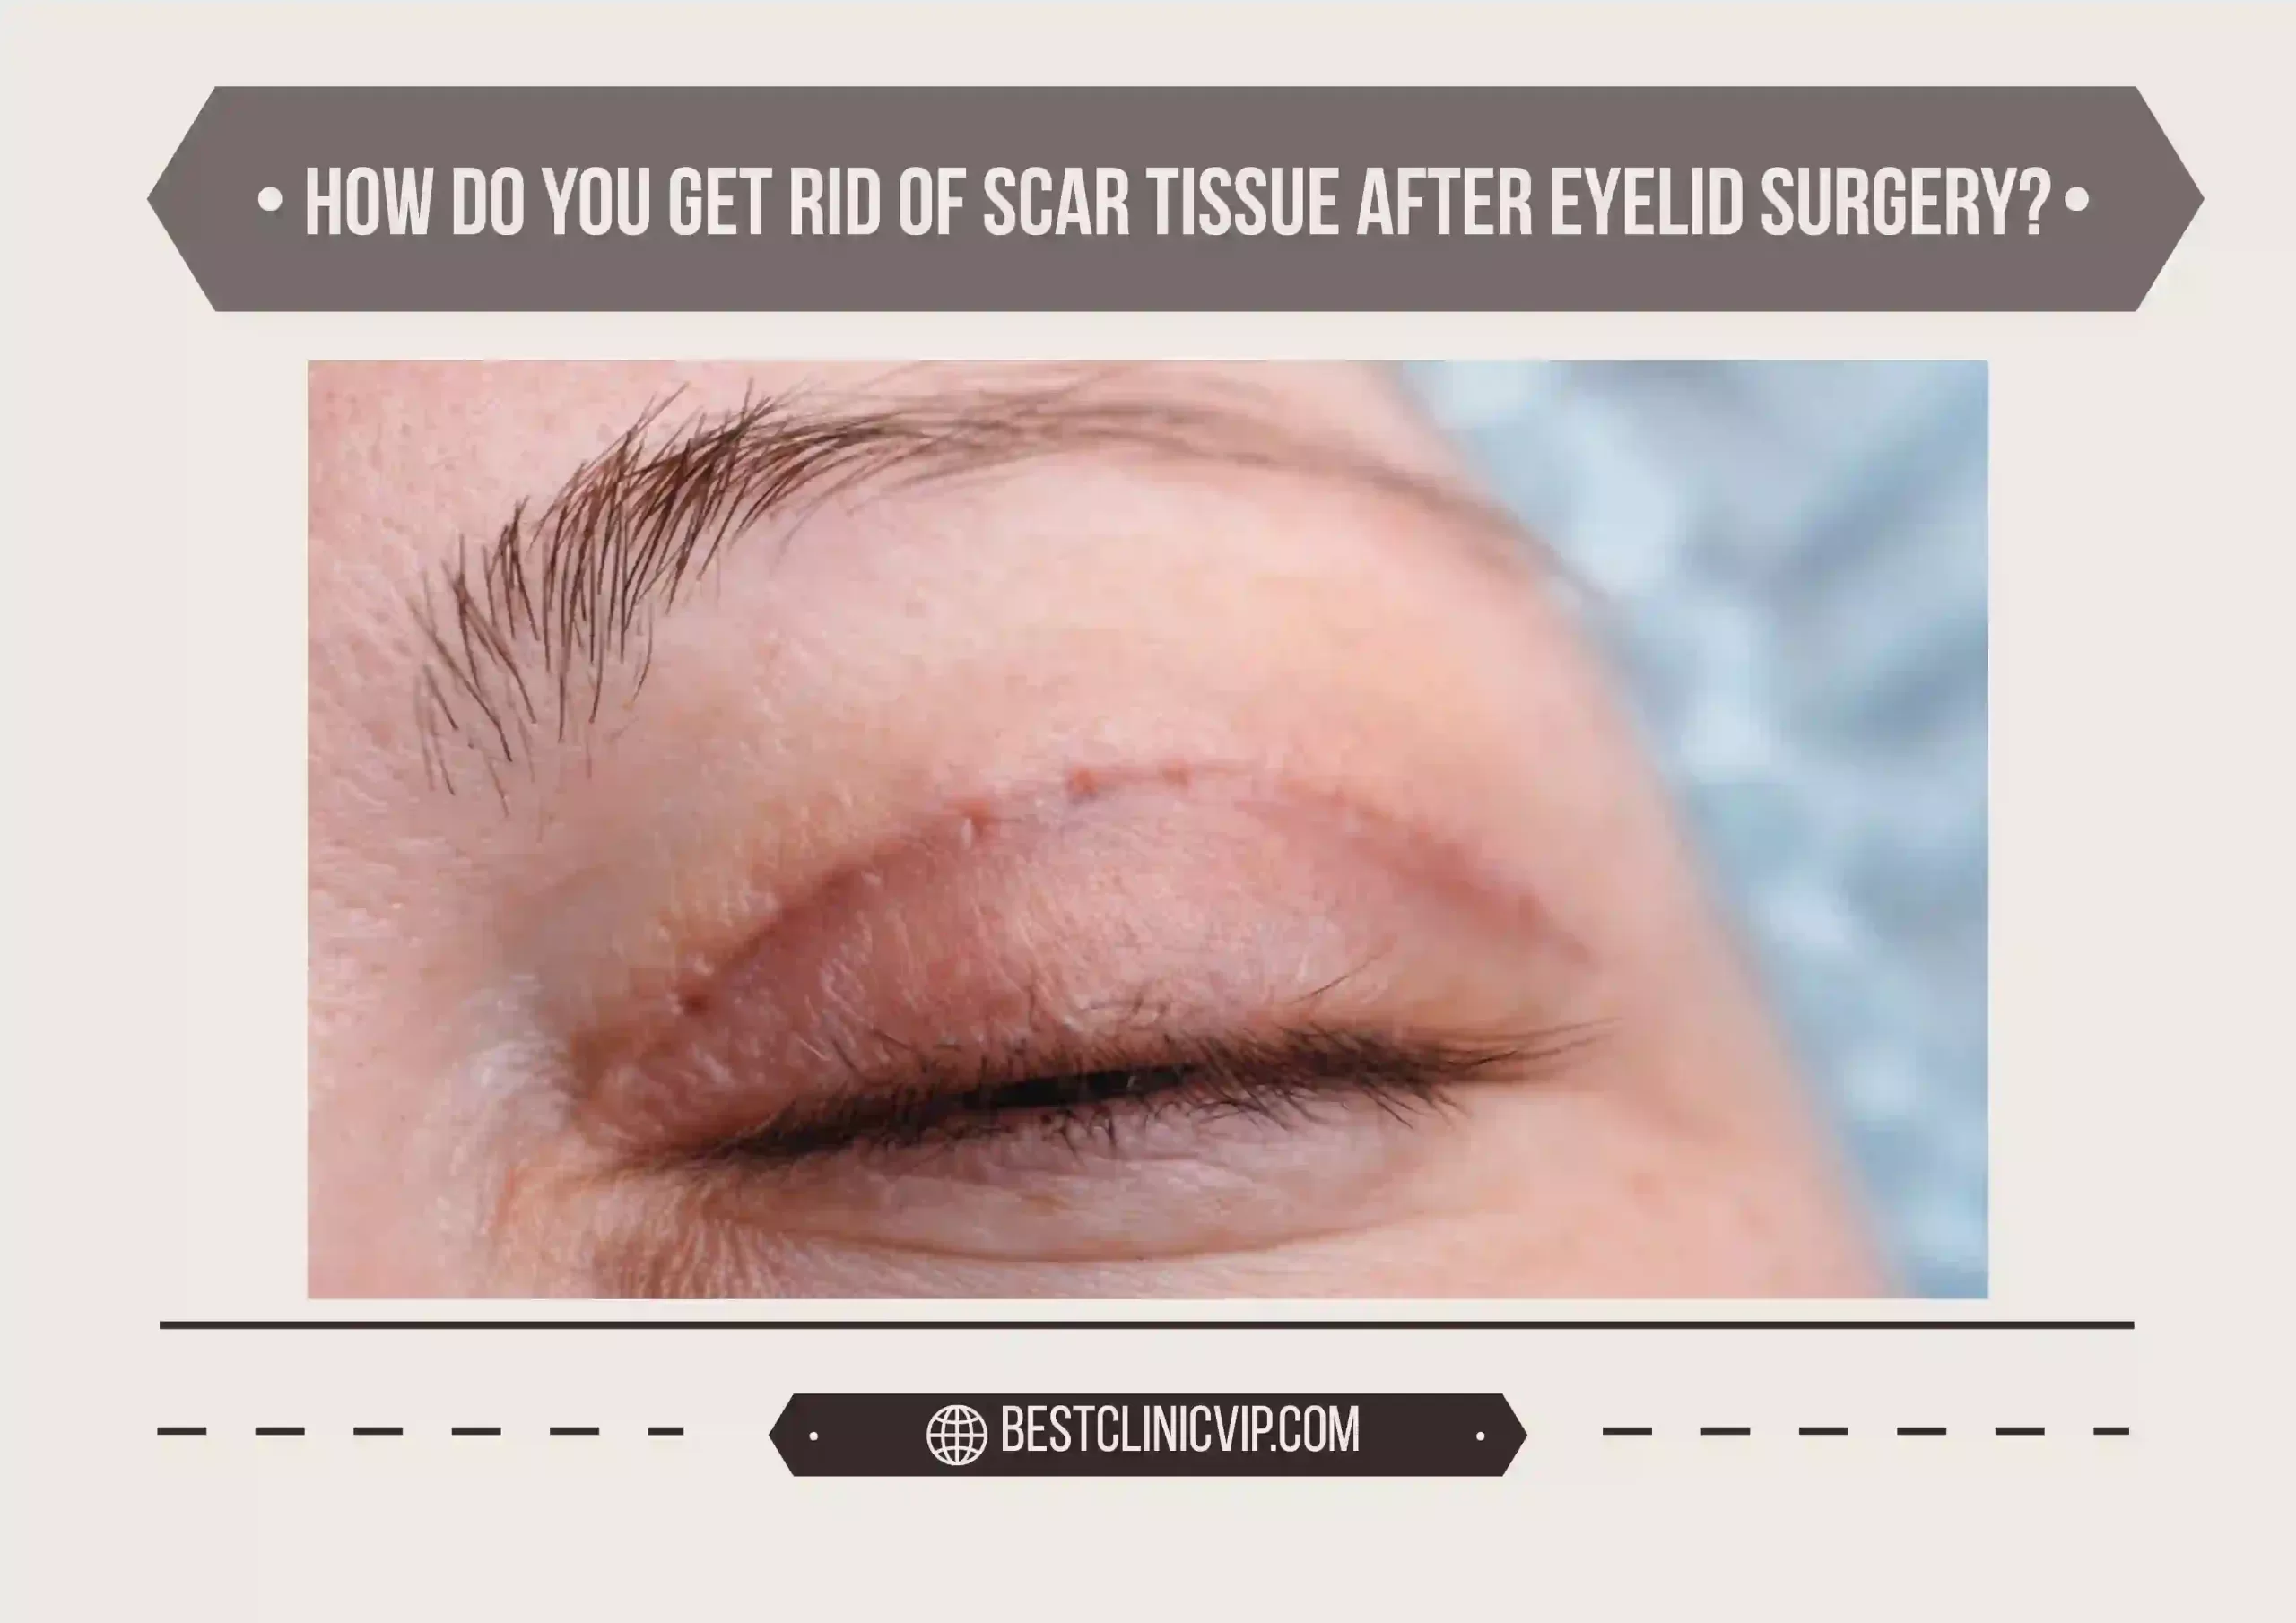 How do you get rid of scar tissue after eyelid surgery?